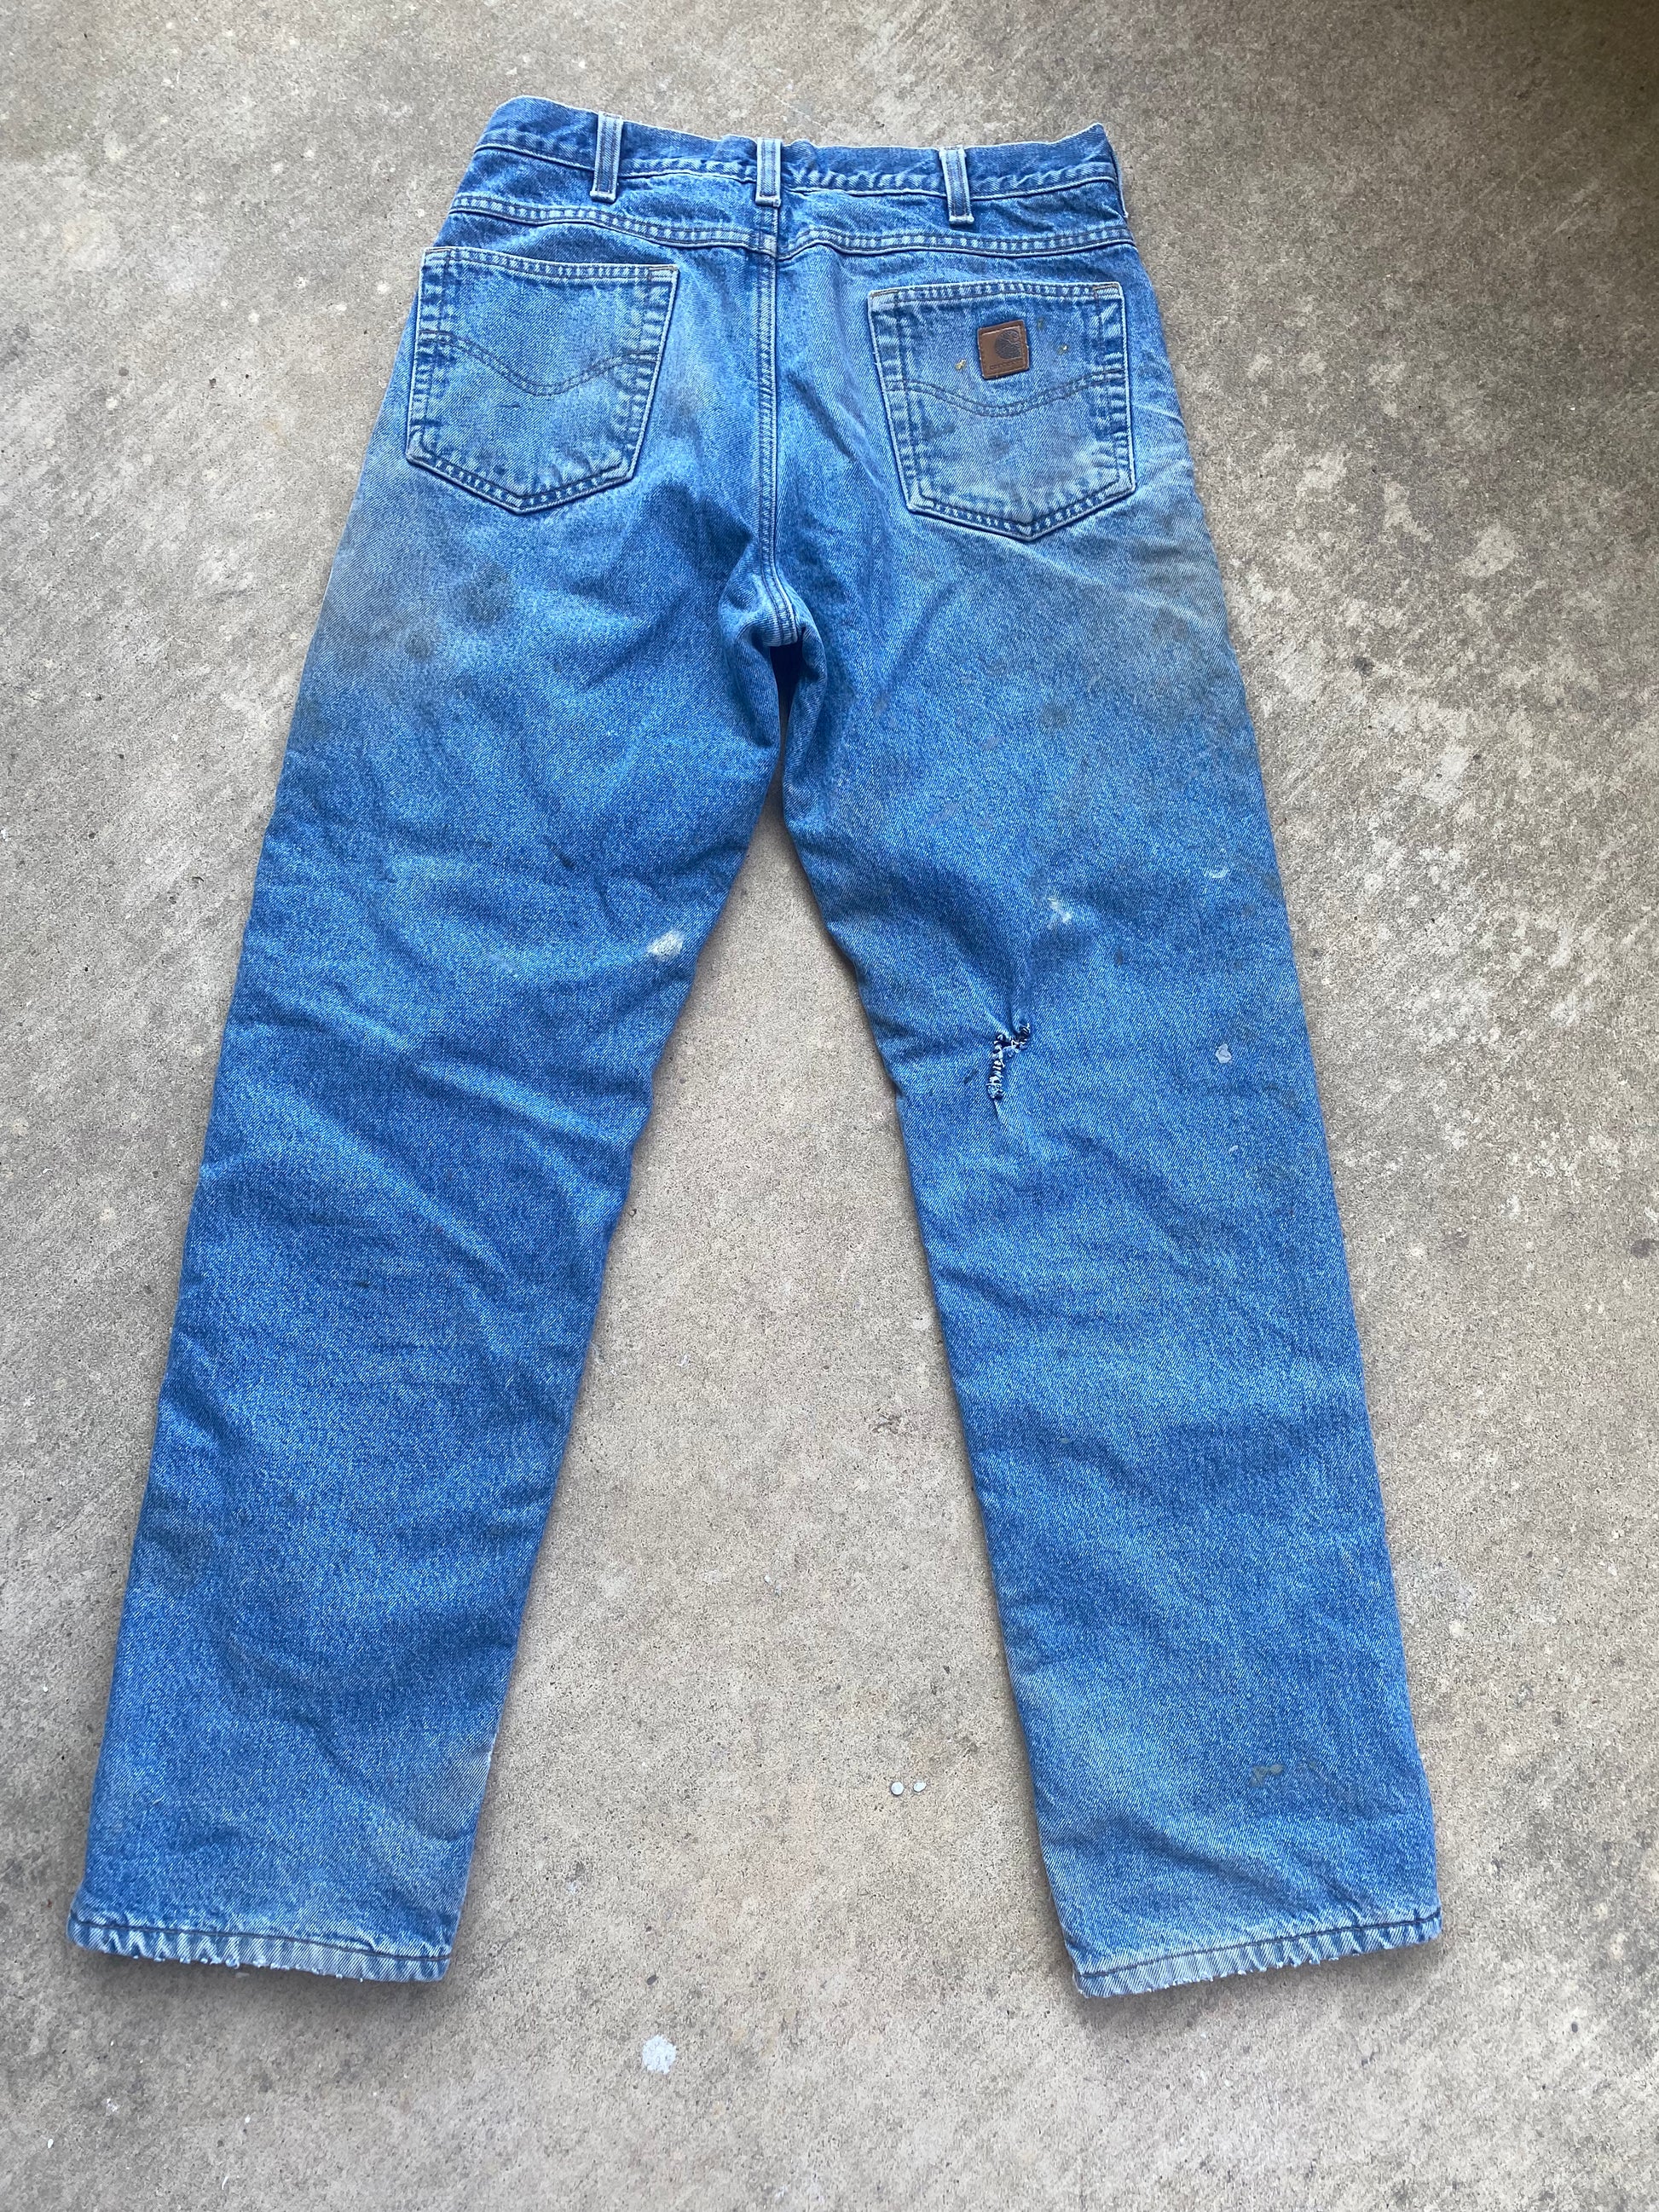 Blanket Lined Carhartt Jeans - Brimm Archive Wardrobe Research